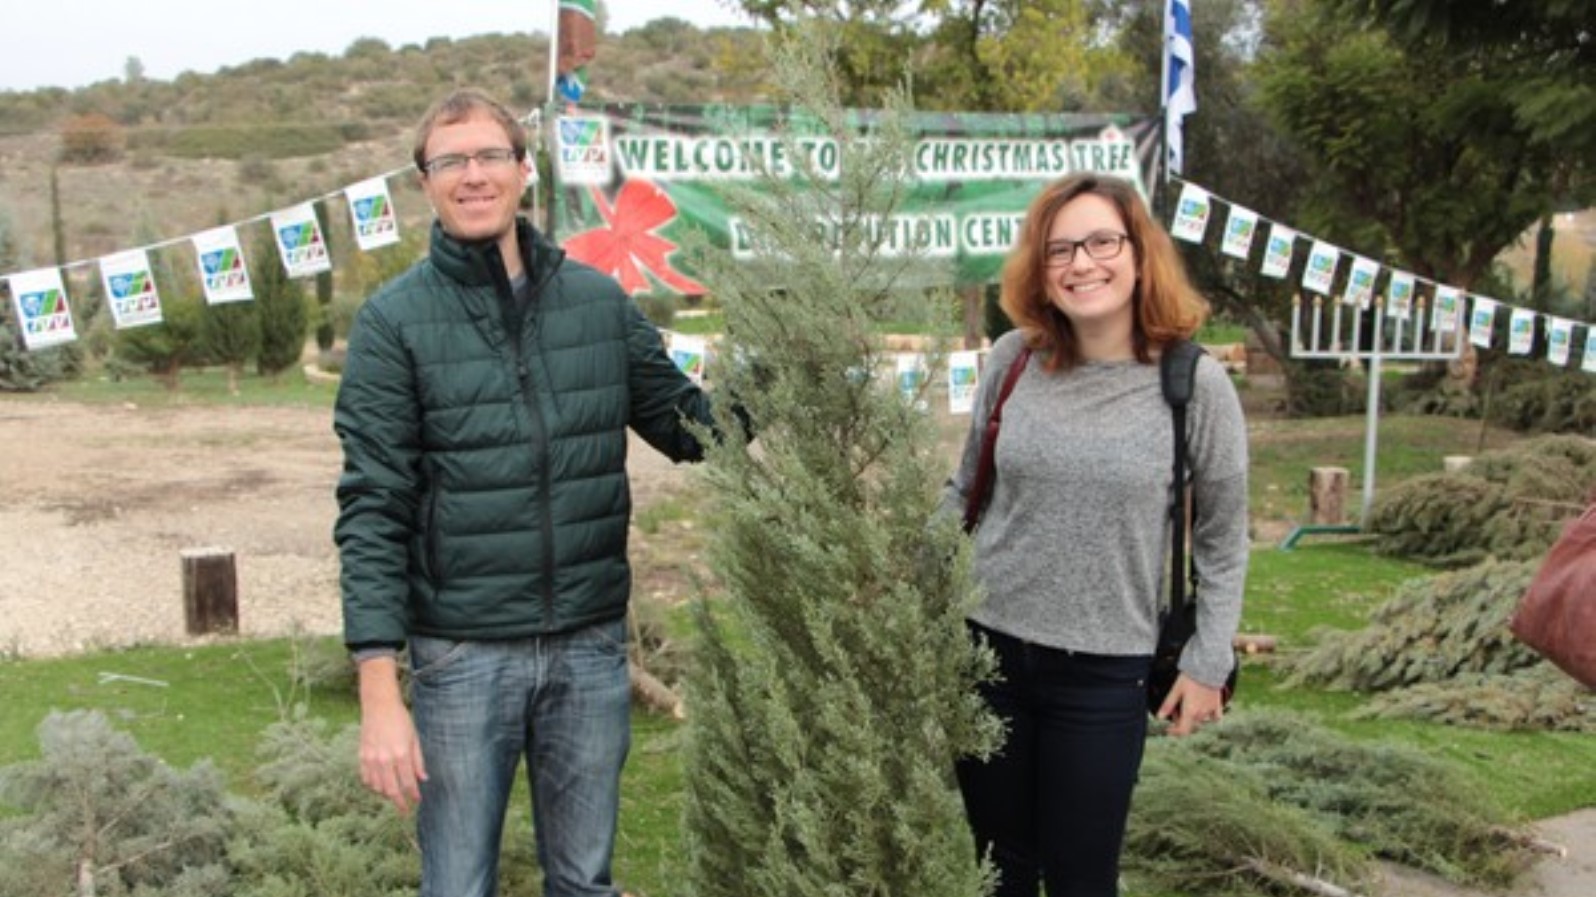 Christmas trees are distributed every year in Israel’s northern district ahead of Christmas and Novy God. Photo by Yoav Devir/KKL-JNF